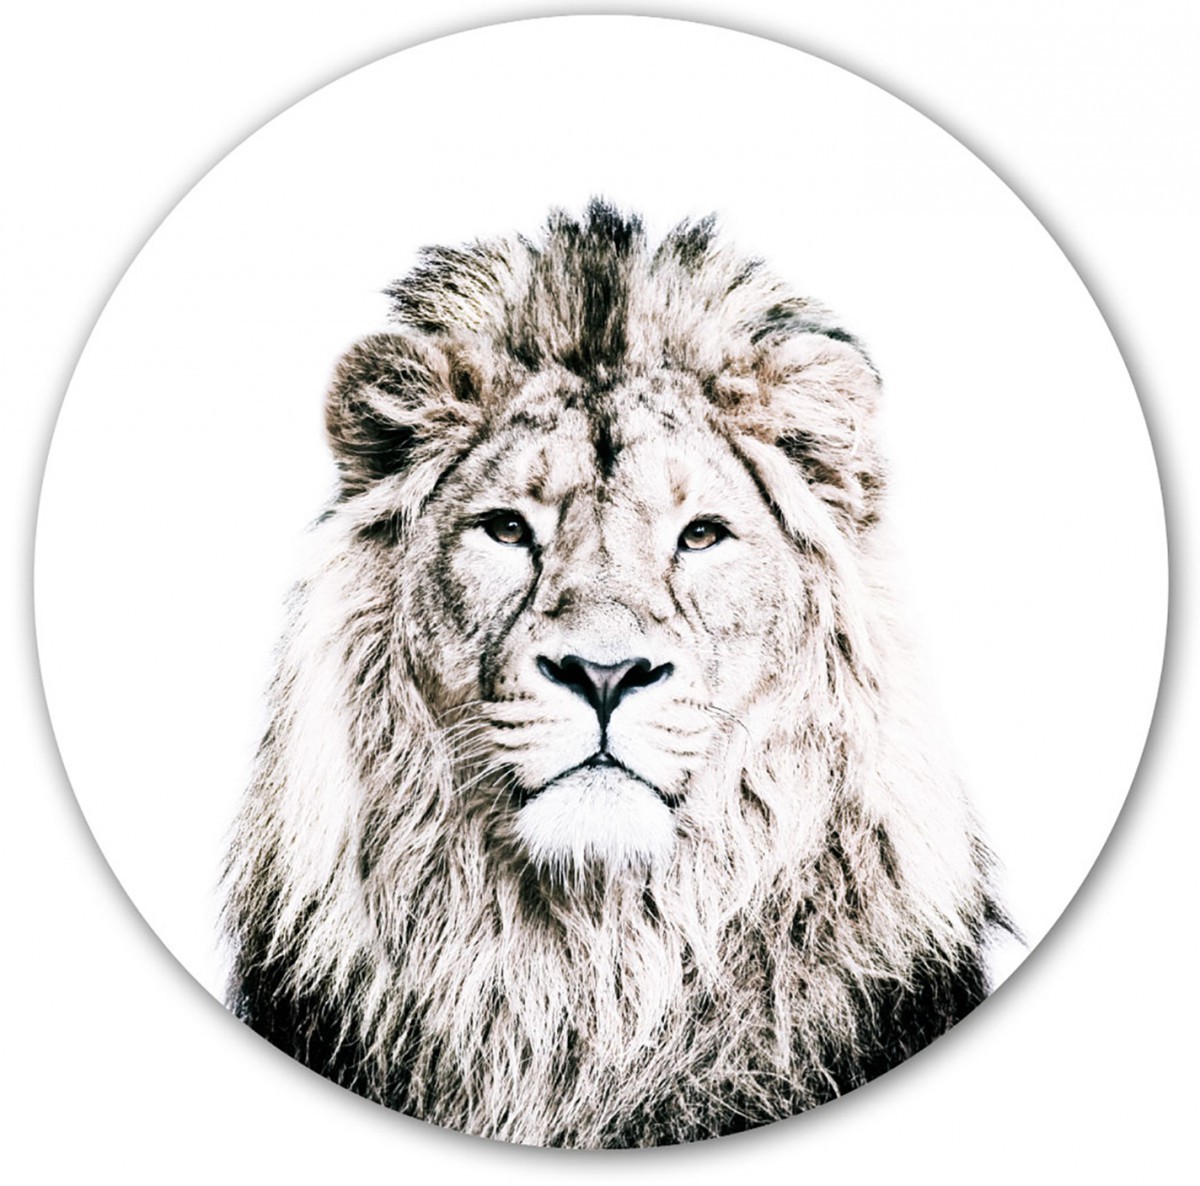 Magnetic wall sticker lion by Groovy Magnets - round adhesive wall sticker with animal print